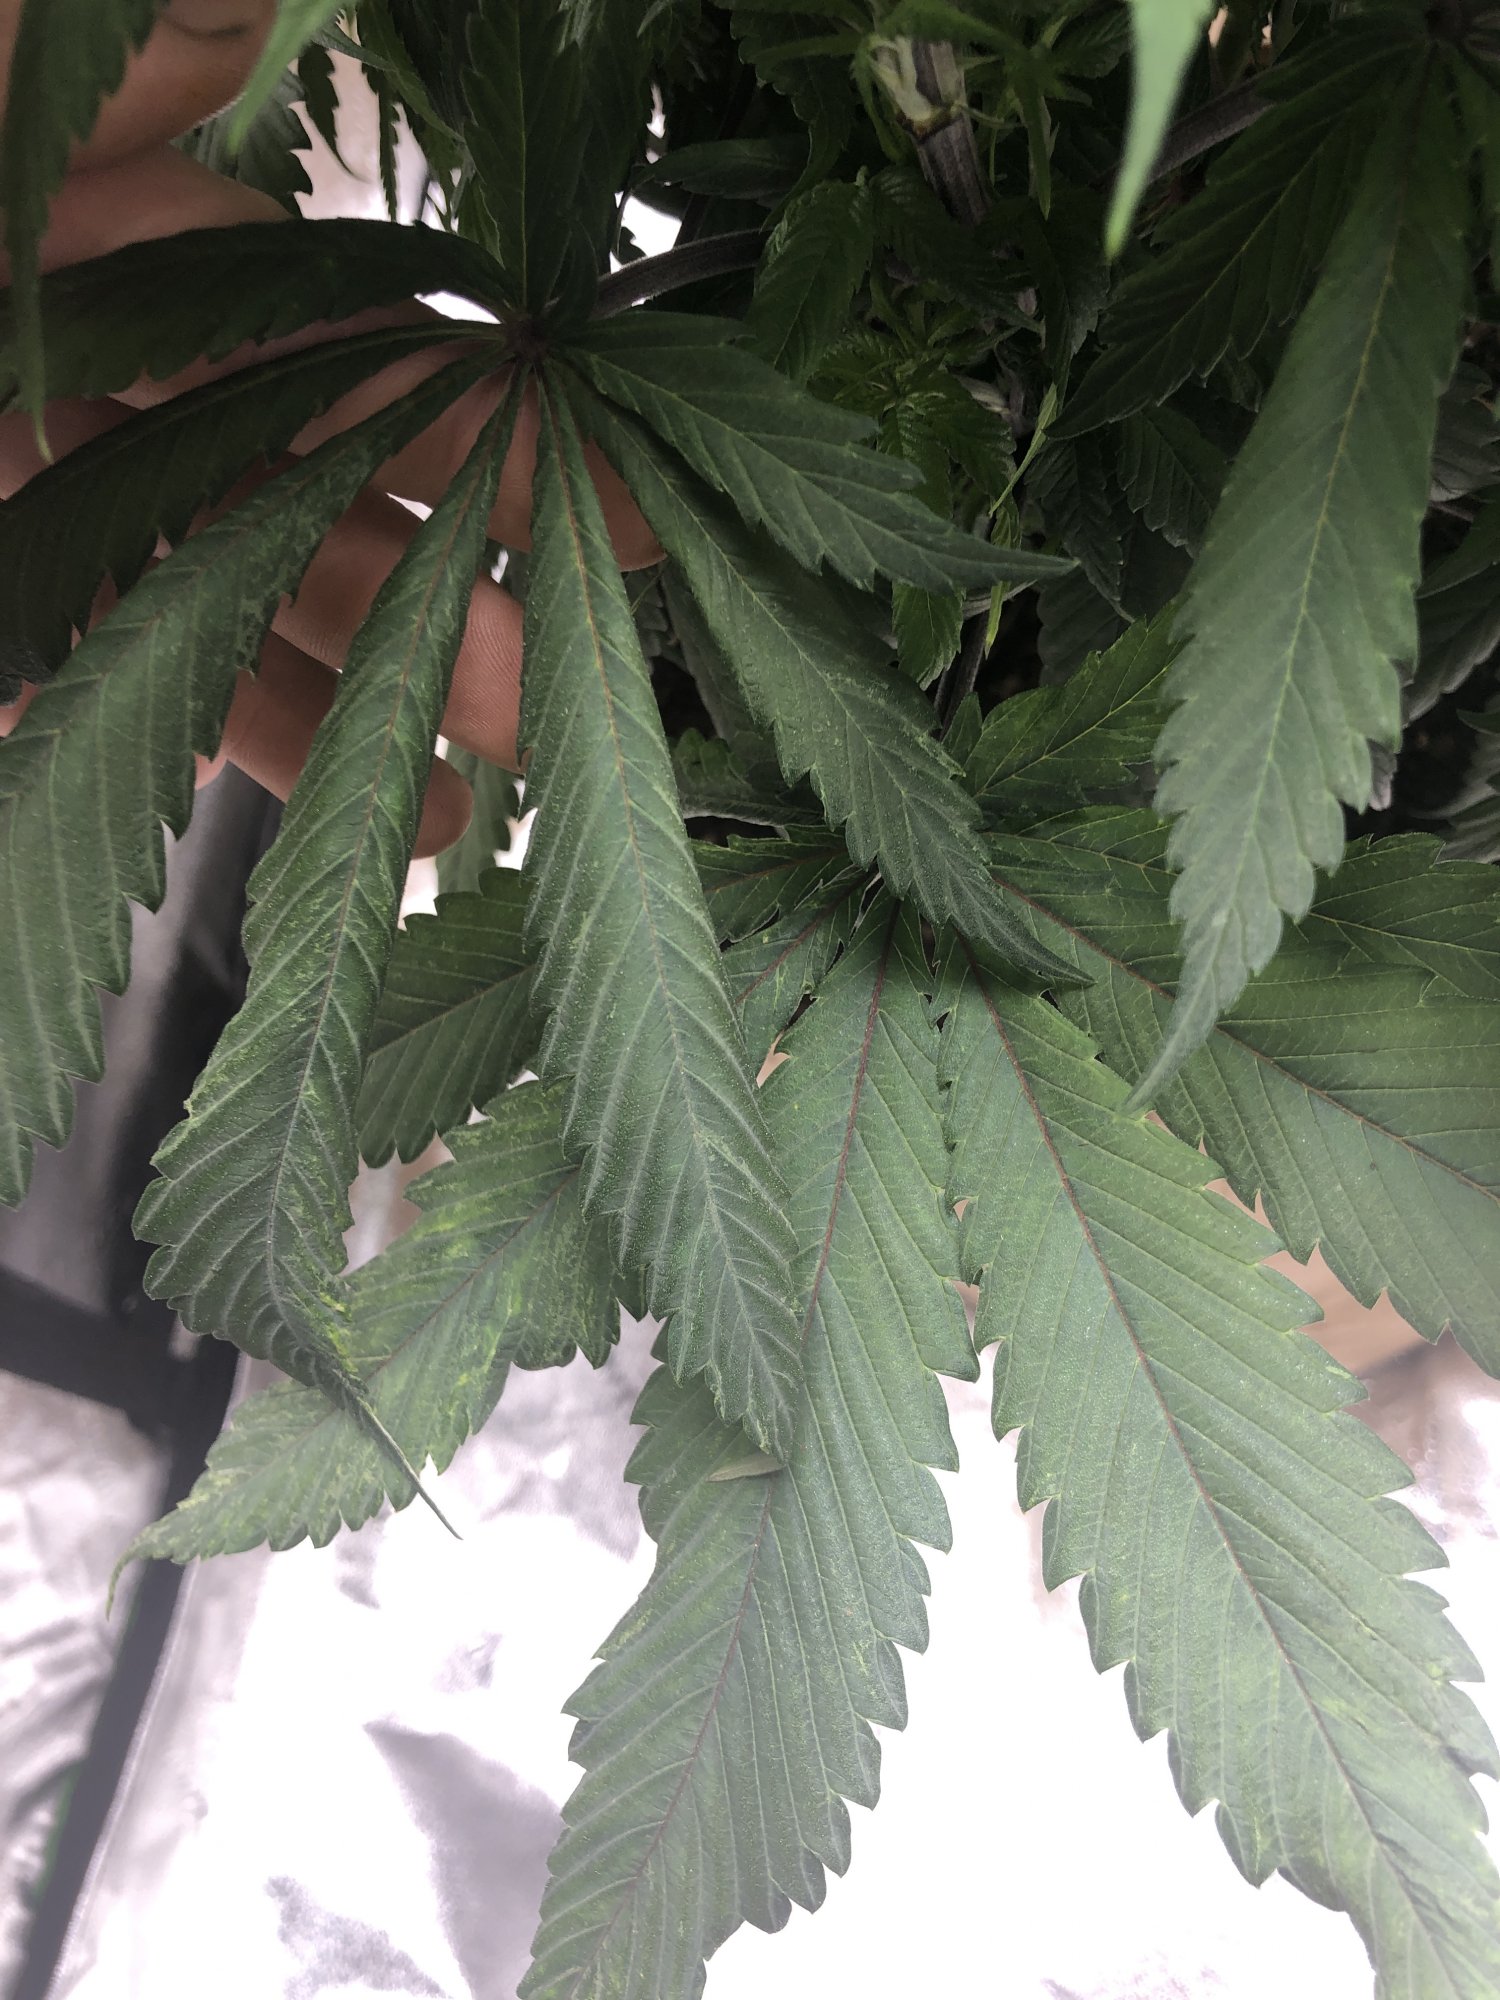 New to this forum and a first time weed grower need some advice and i have a few questions and